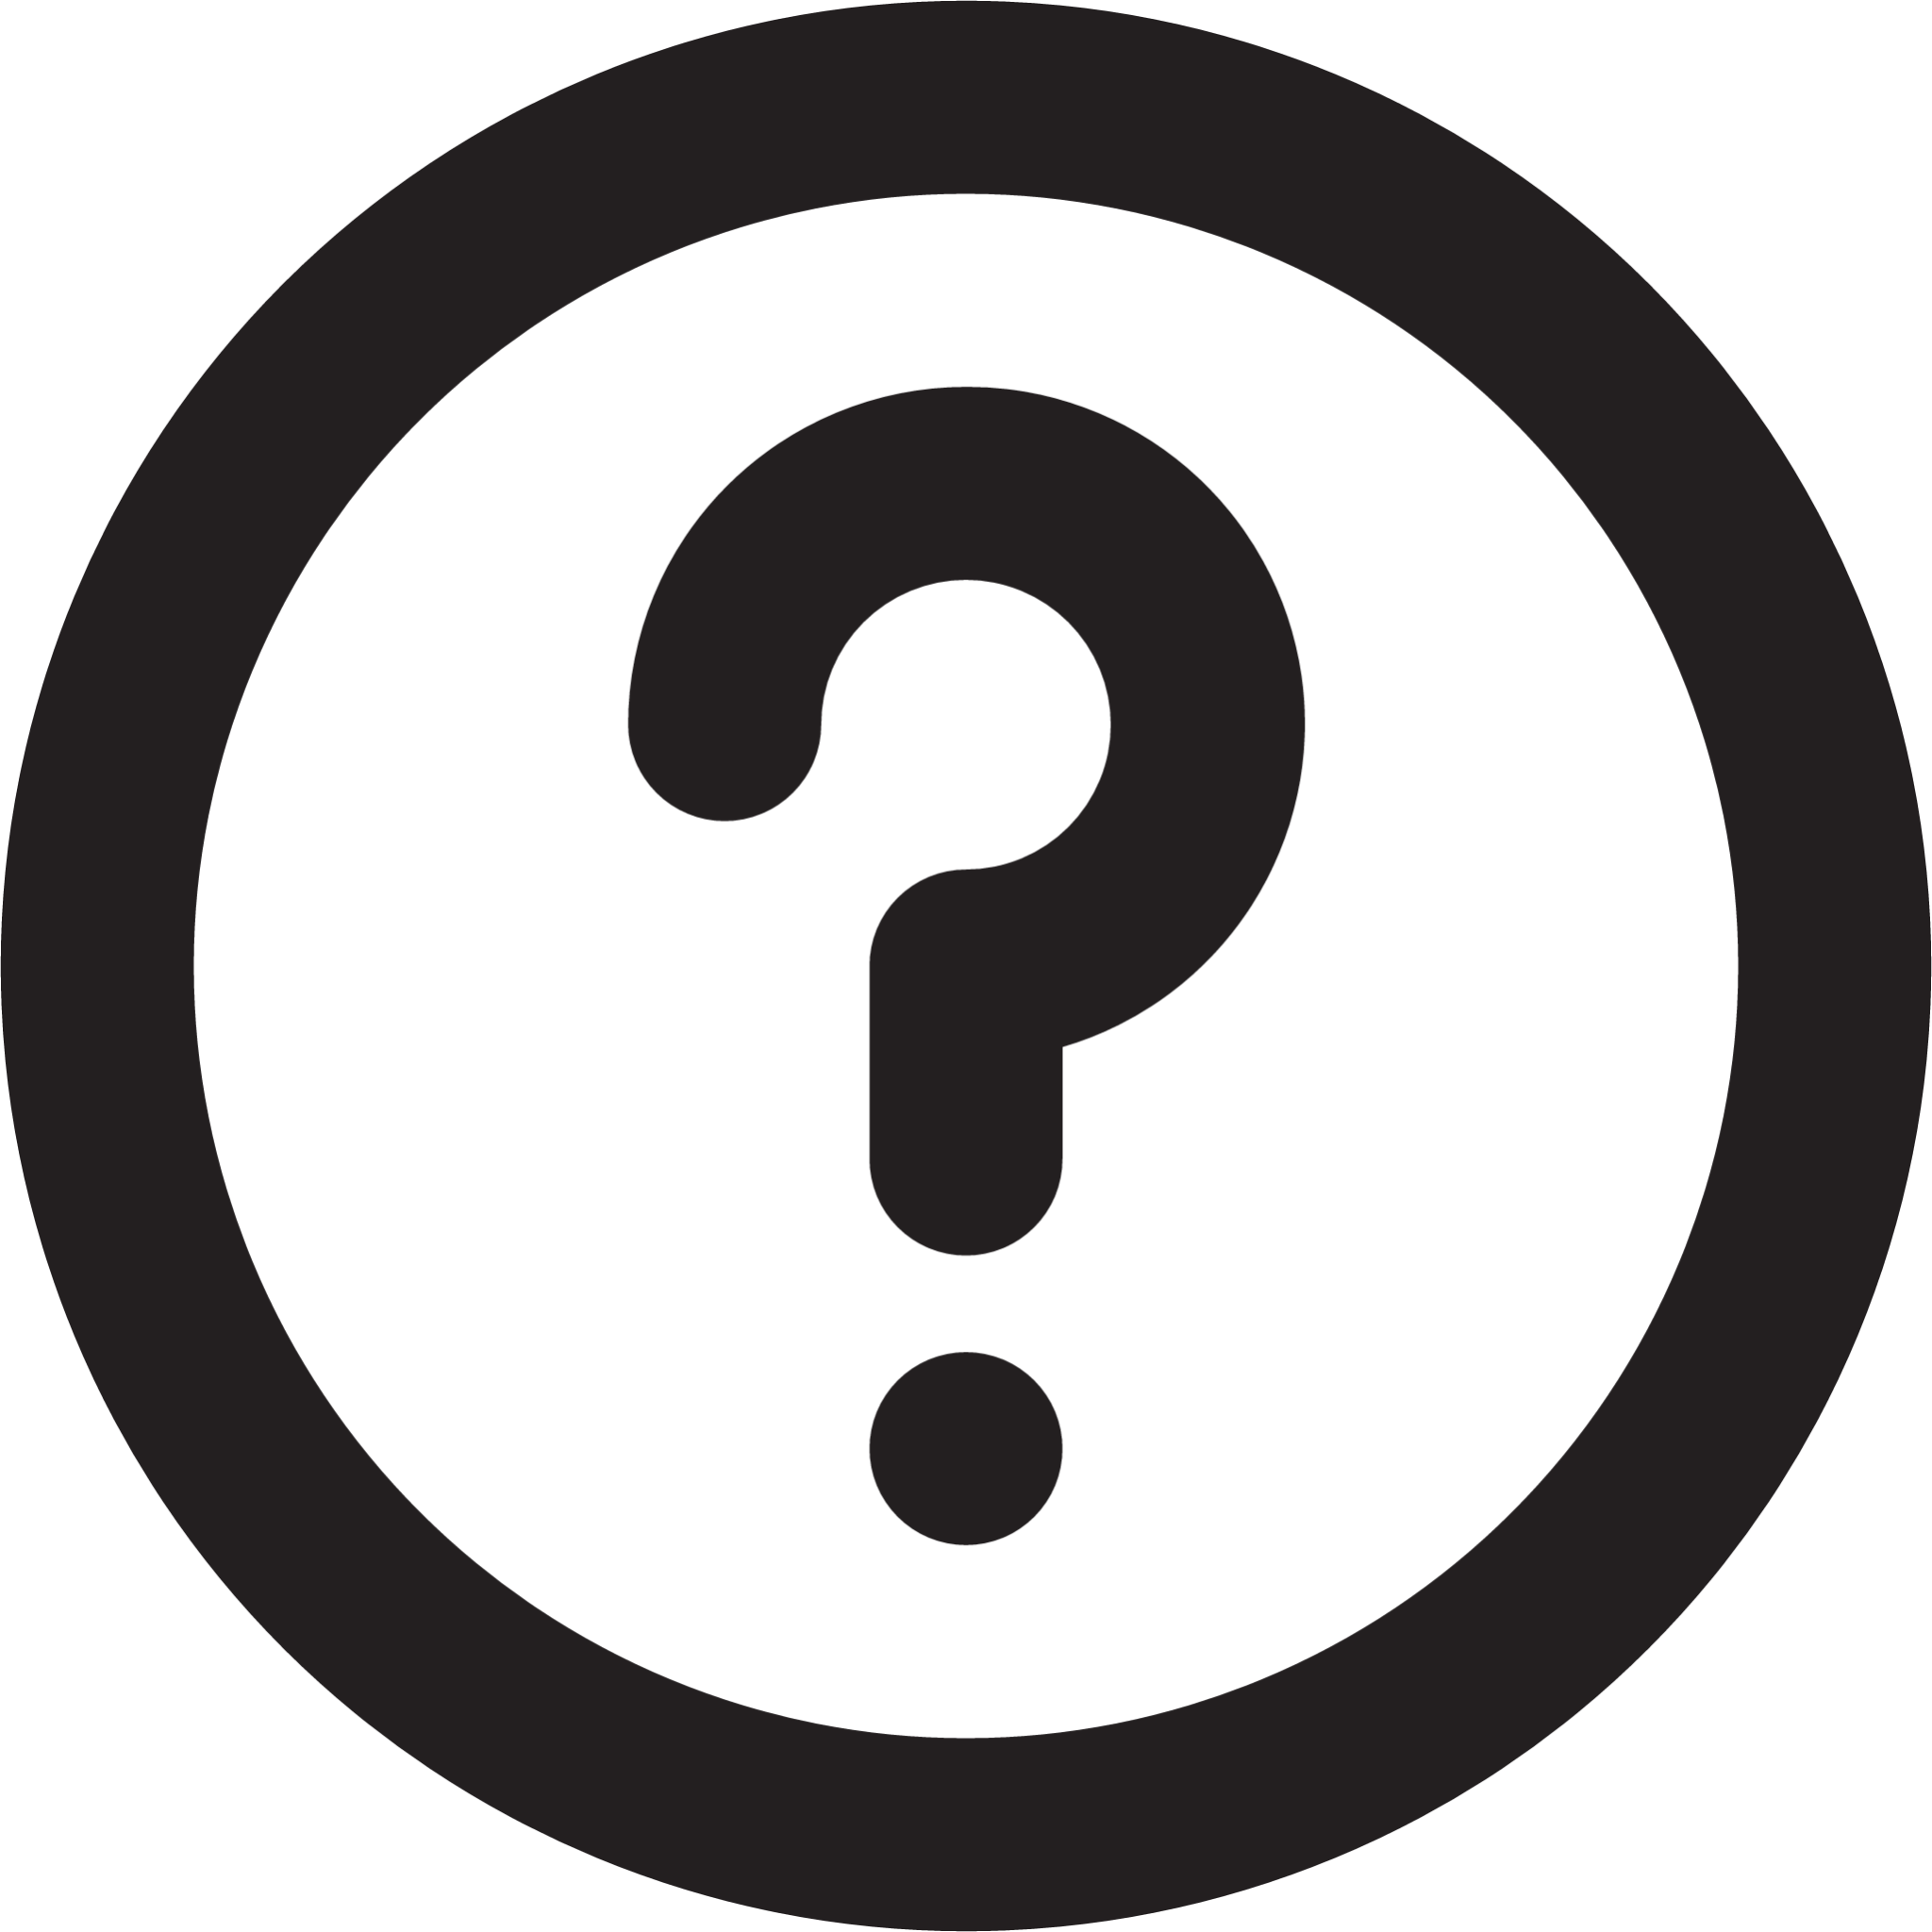 question mark circle outline icon